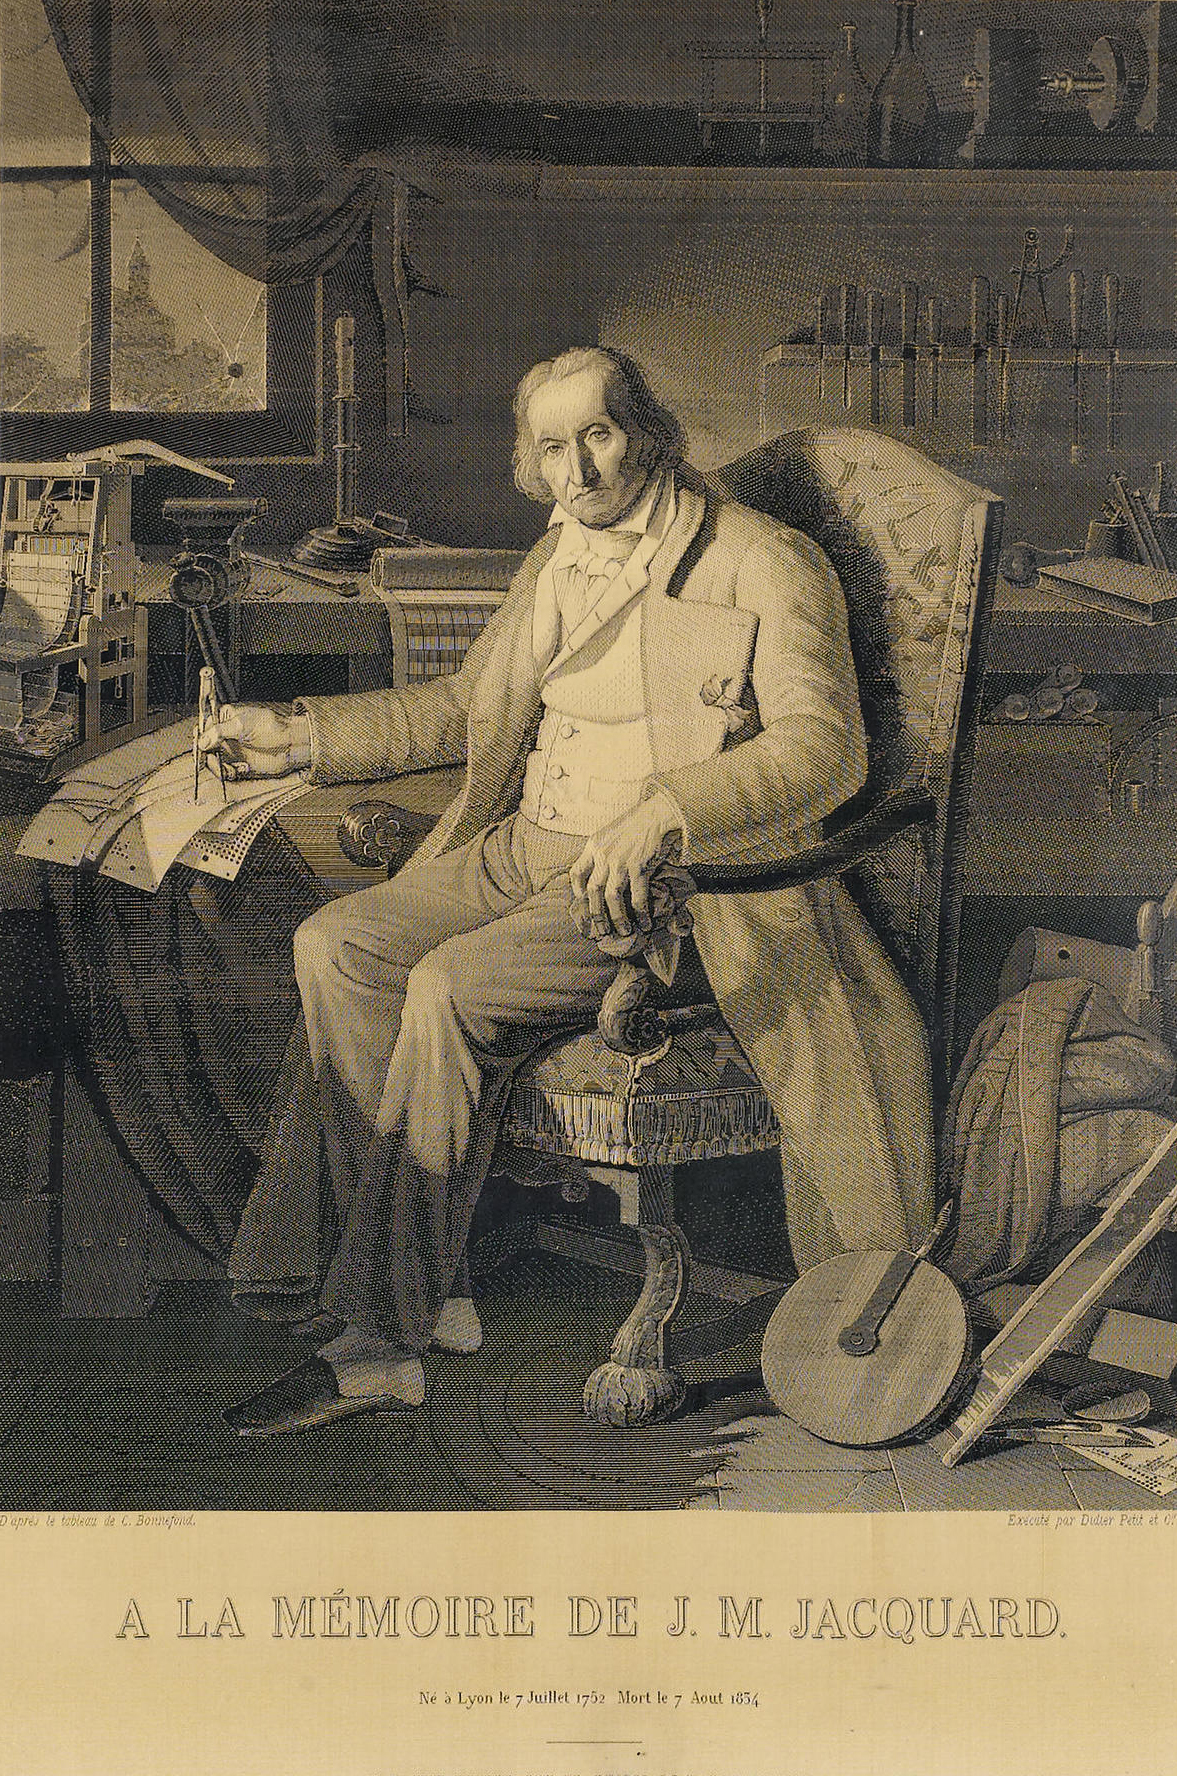 Portrait of Jacquard woven by the Jacquard loom in 1839. This woven silk portrait of the inventor was based on a painting by Claude Bonnefond (1796–1860)  commissioned by the city of Lyon in 1831. The Lyon manufacturer Didier, Petit et Cie ordered the silk version from weaver Michel-Marie Carquillat, a specialist in this kind of work. Producing the image required 24,000 punched cards. Each card had over 1,000 hole positions. "The delicate shading, crafted shadows and fine resolution of the Jacquard portrait challenged existing notions that machines were incapable of subtlety. Gradations of shading were surely a matter of artistic taste rather than the province of machinery, and the portrait blurred the clear lines between industrial production and the arts." 